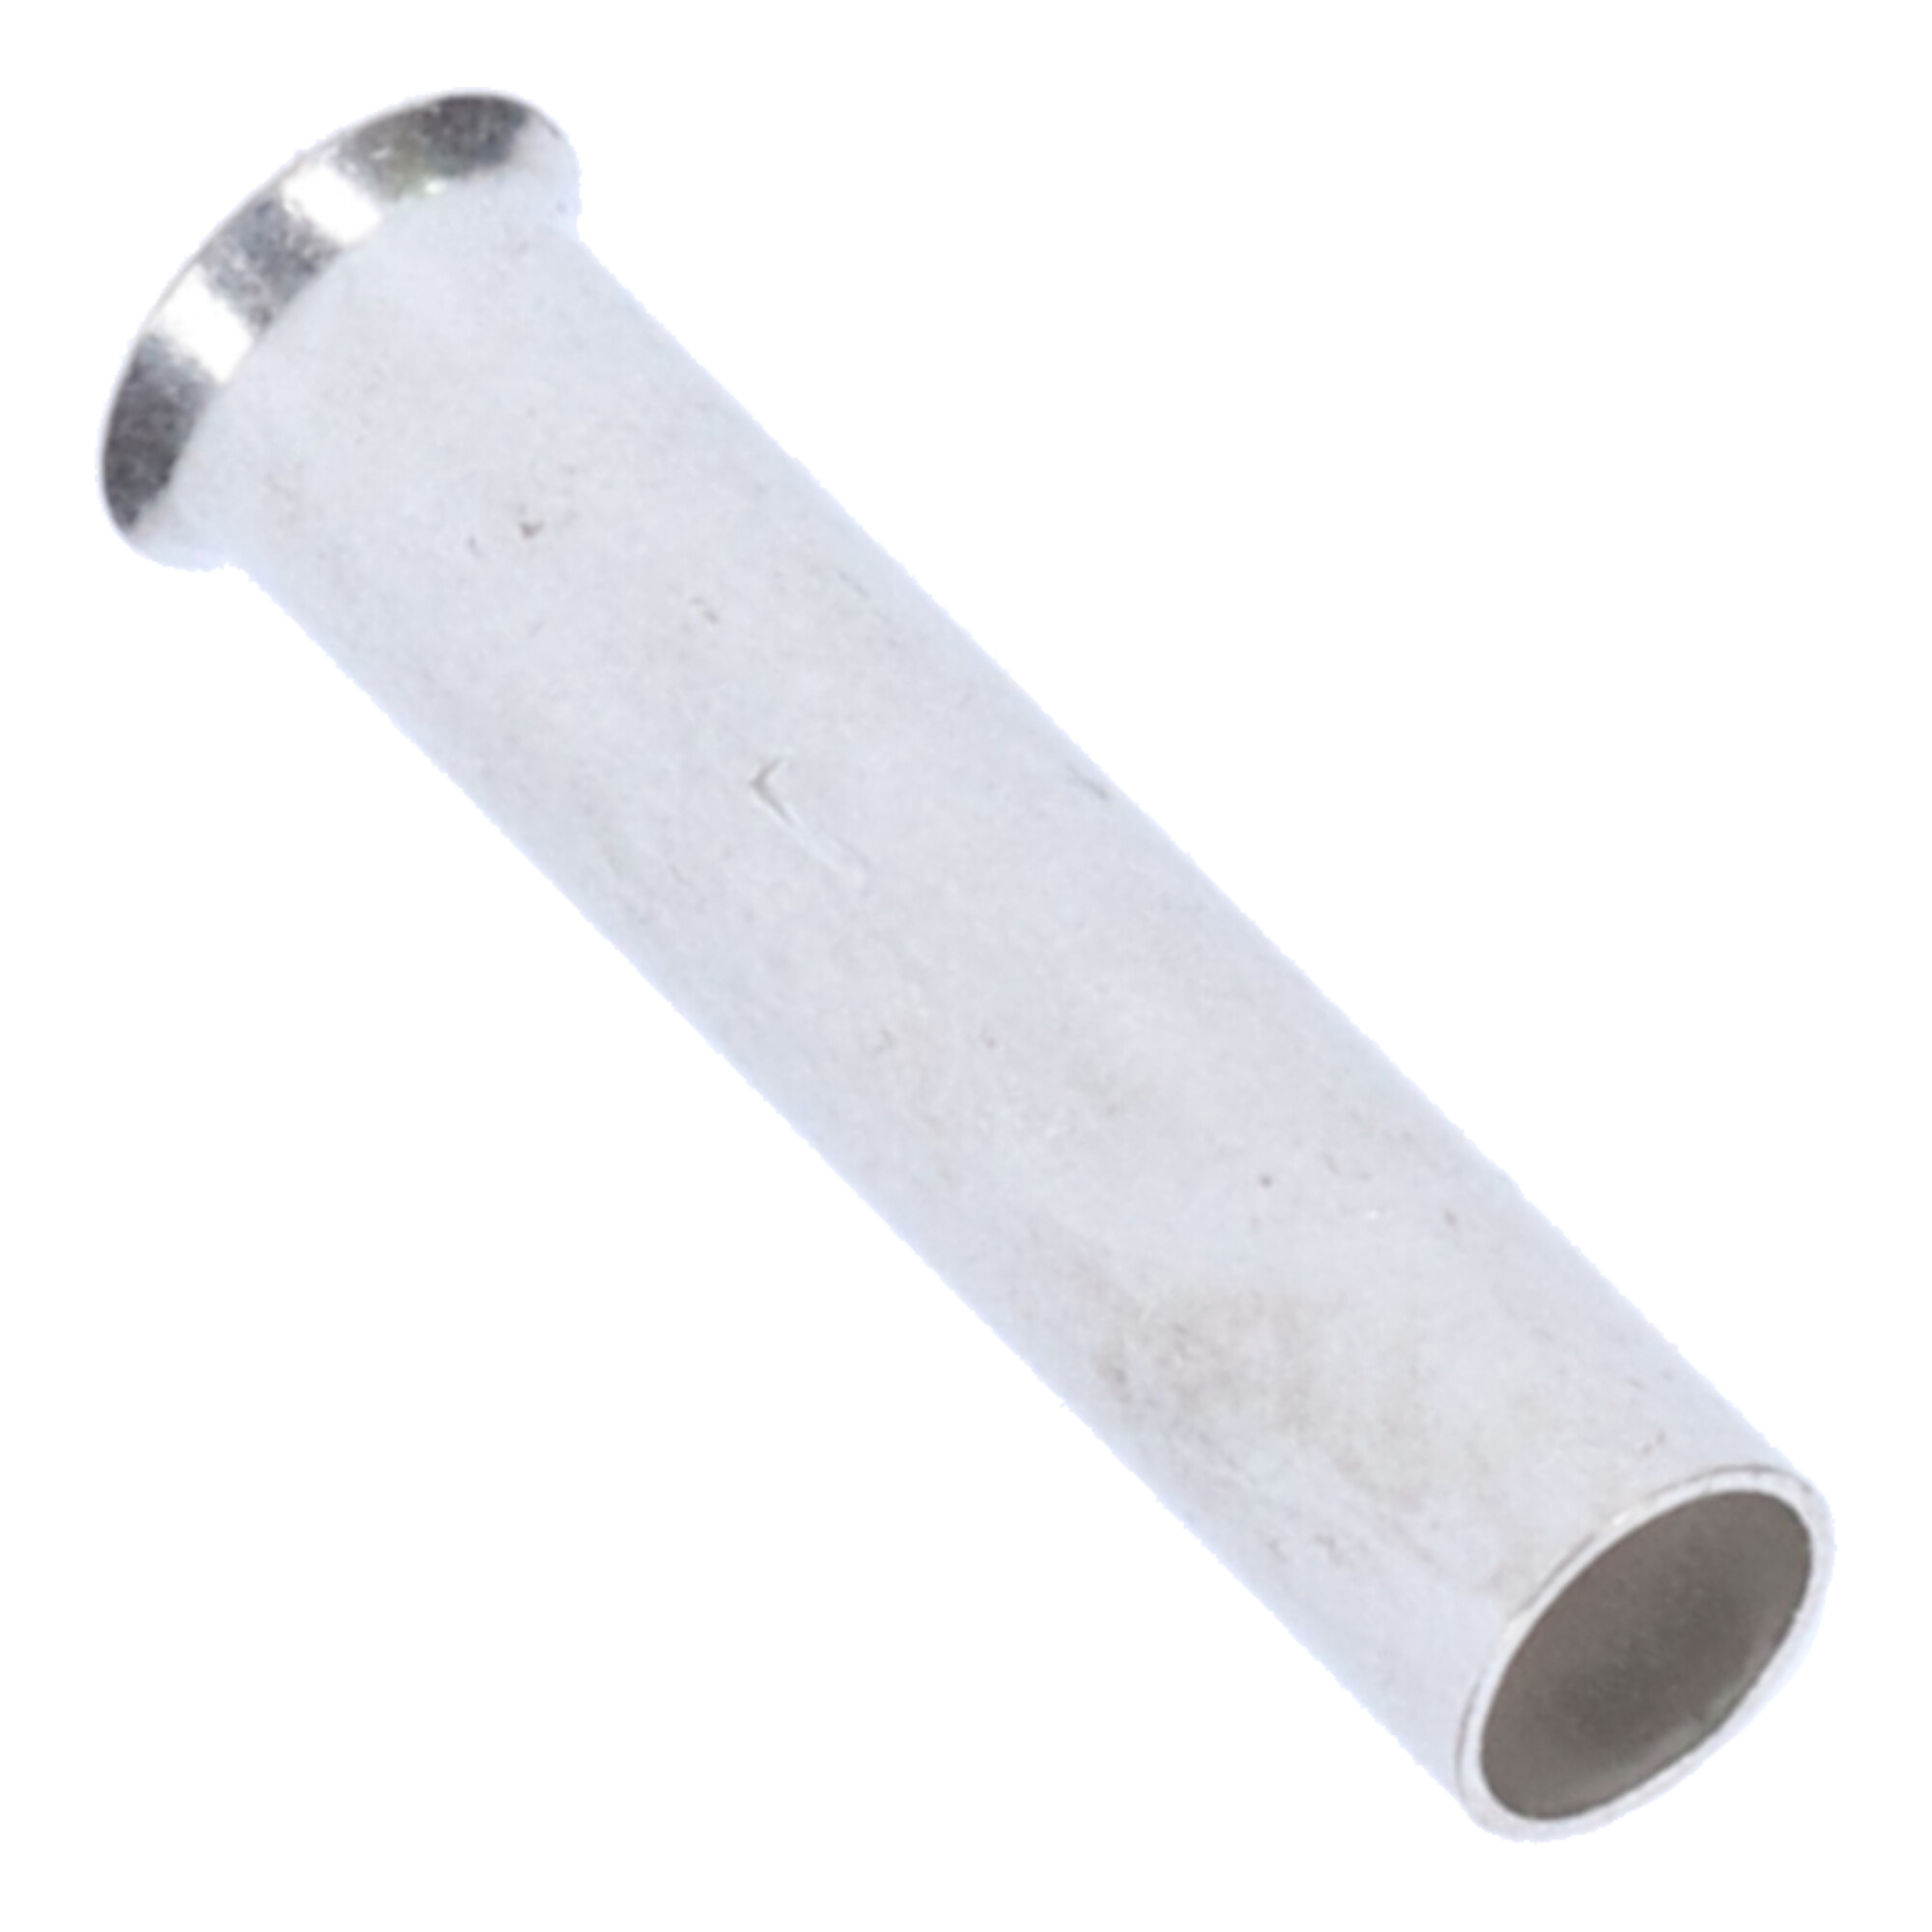 15-B02507 Uninsulated wire end sleeve